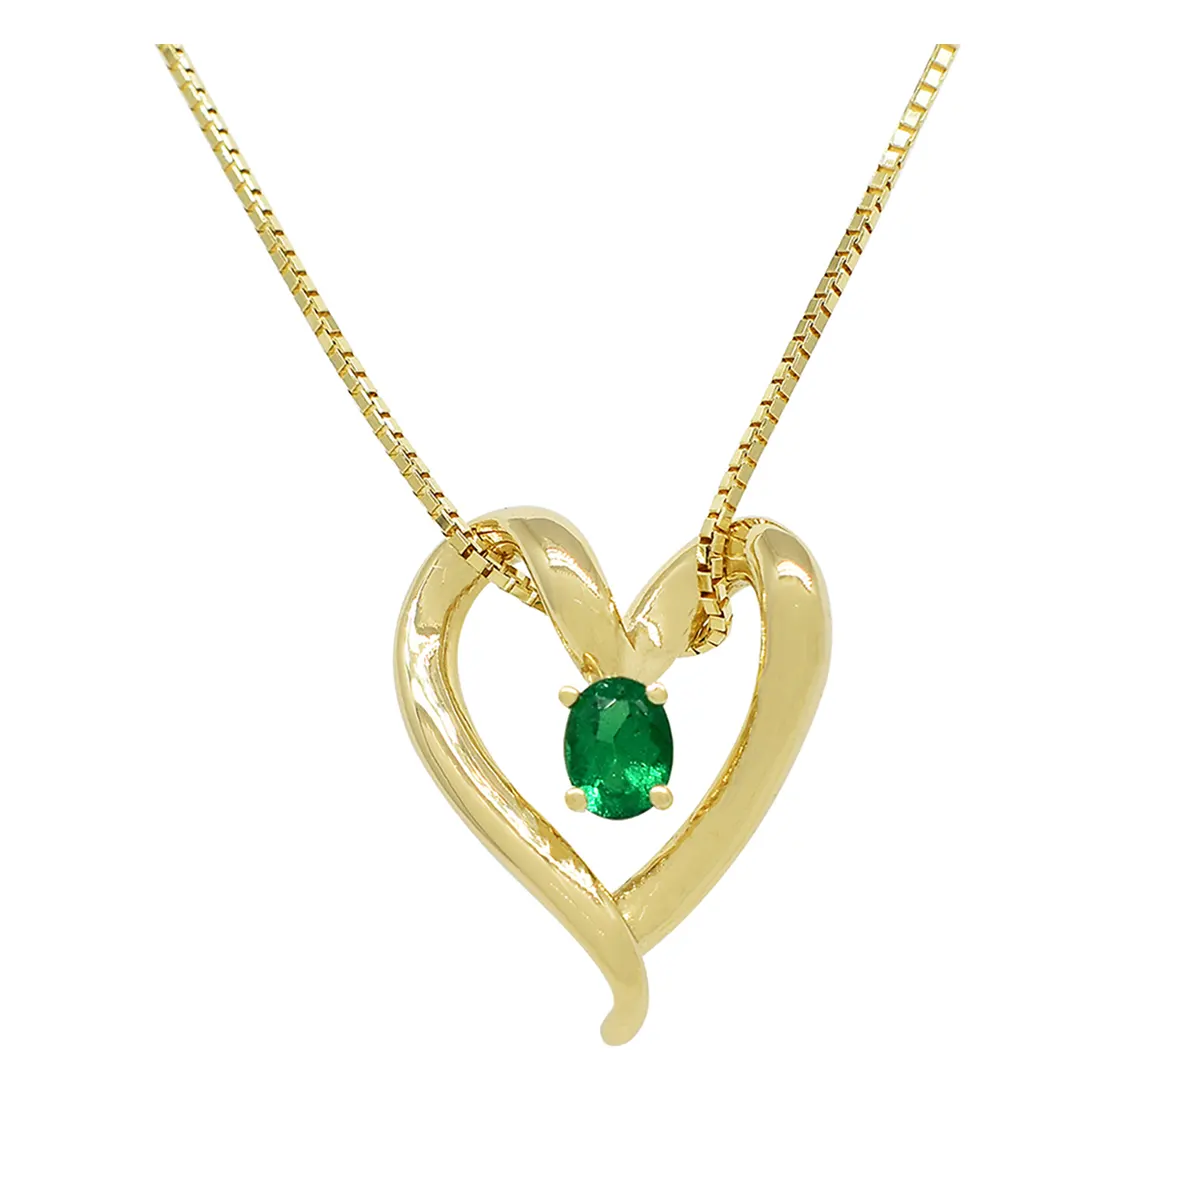 Yellow Gold Heart Shaped Necklace with Oval Shape Natural Emerald